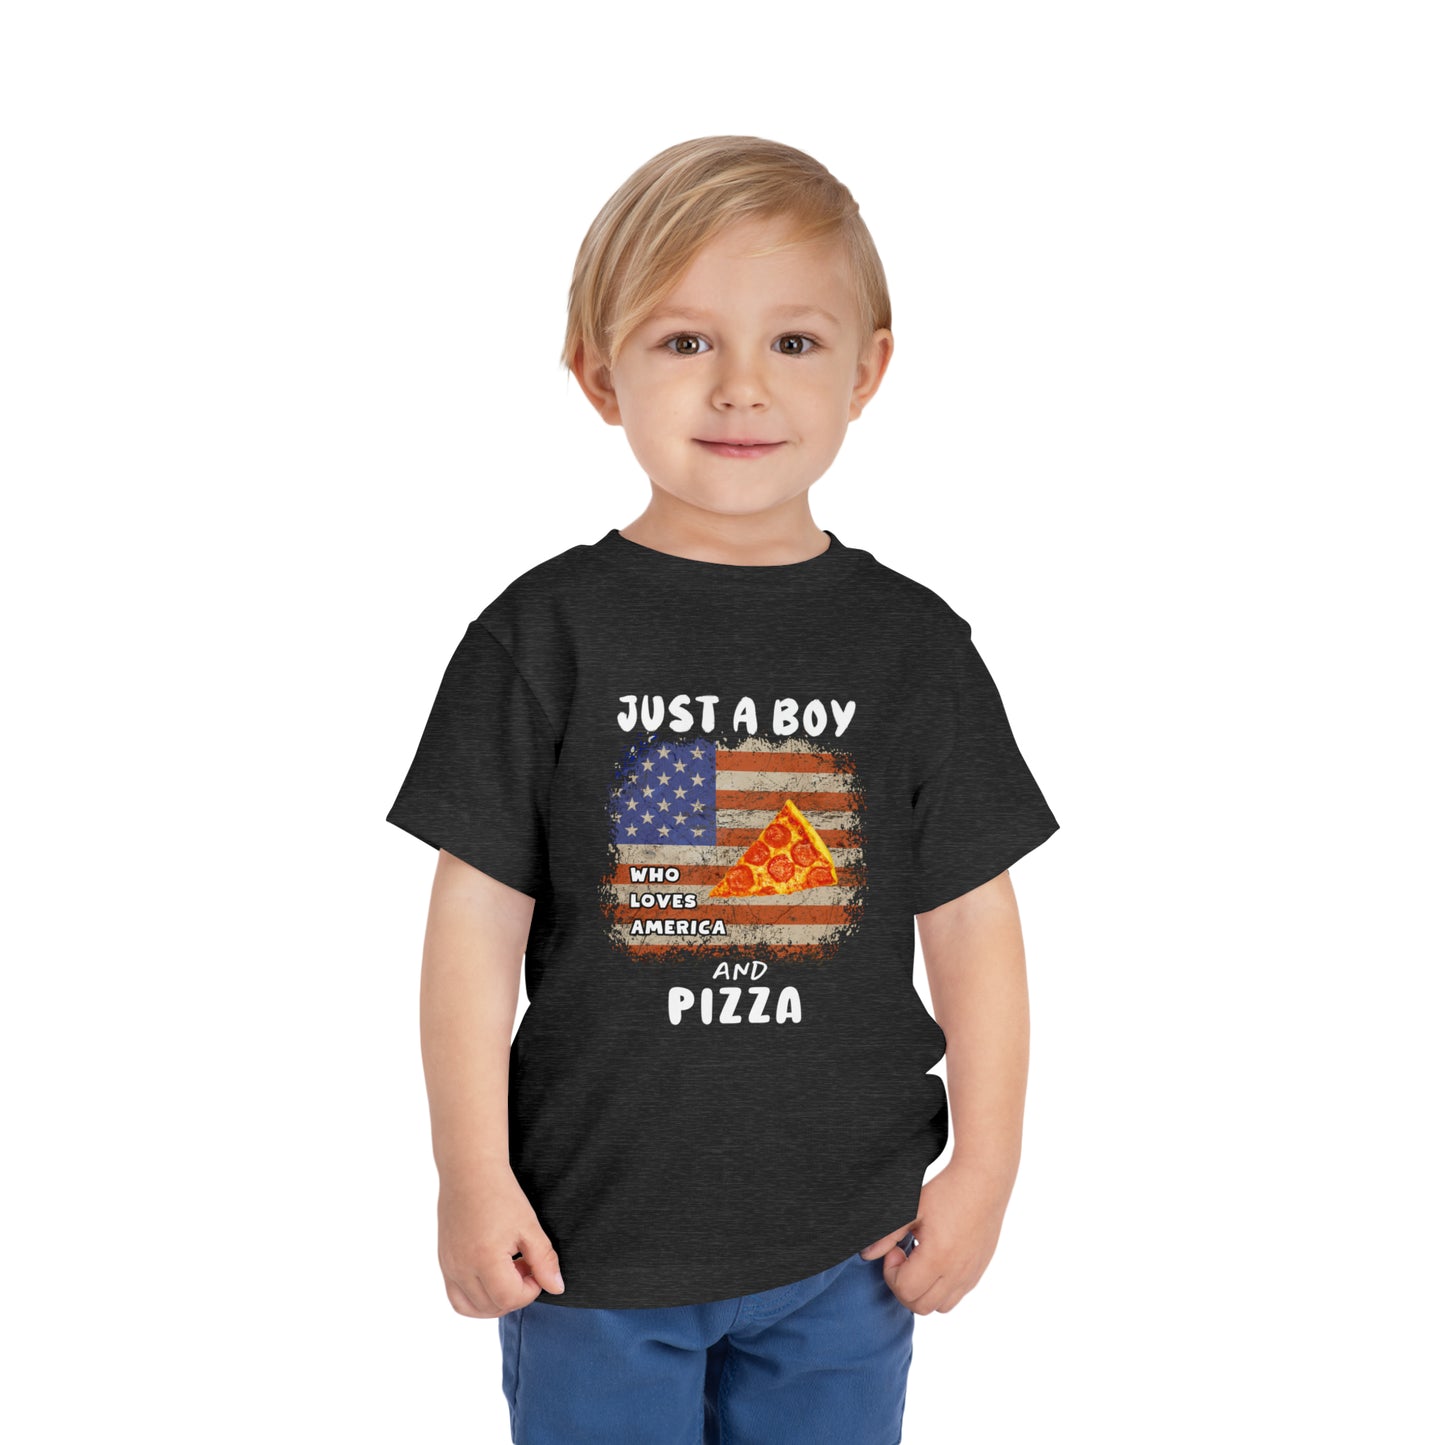 Just a Boy Who Loves America and Pizza - Toddler Short Sleeve Tee